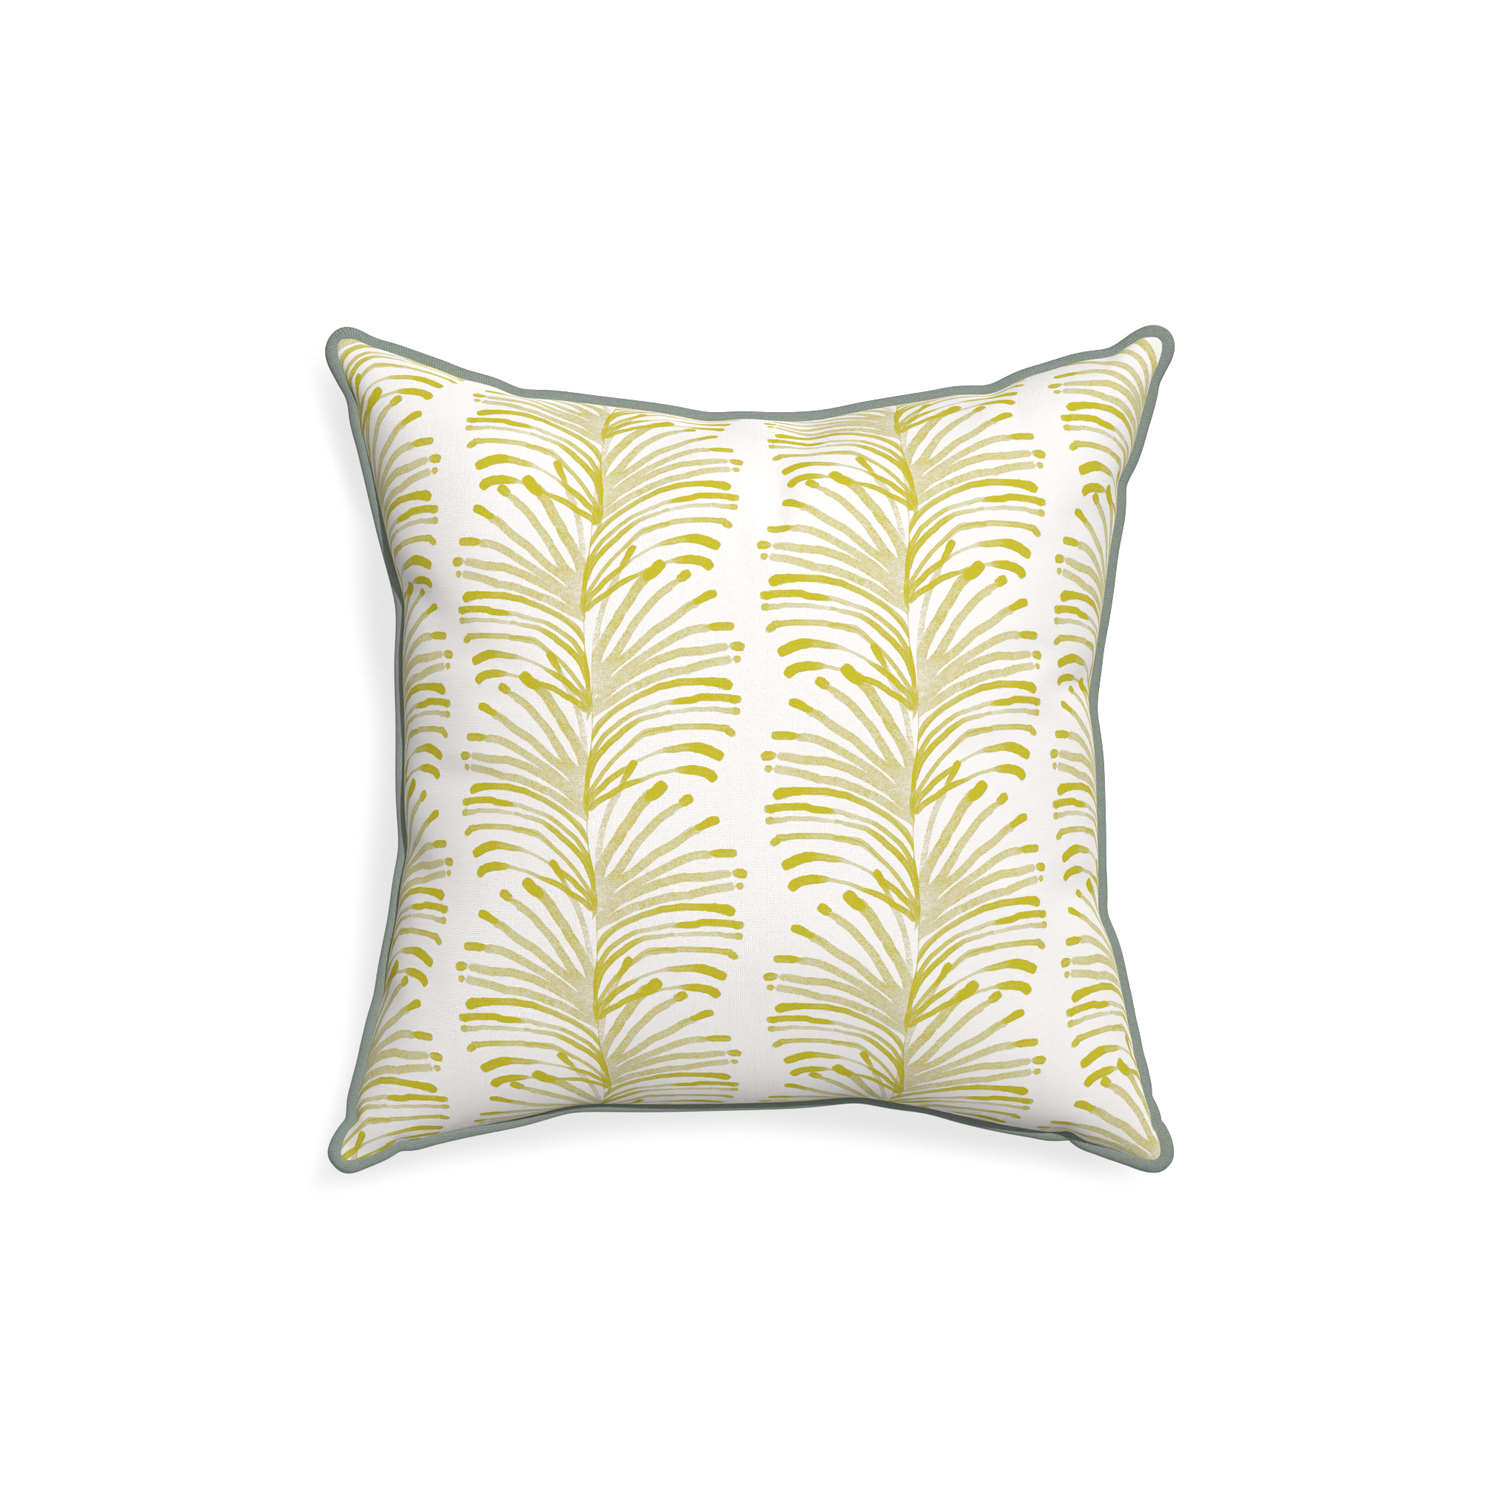 18-square emma chartreuse custom yellow stripe chartreusepillow with sage piping on white background